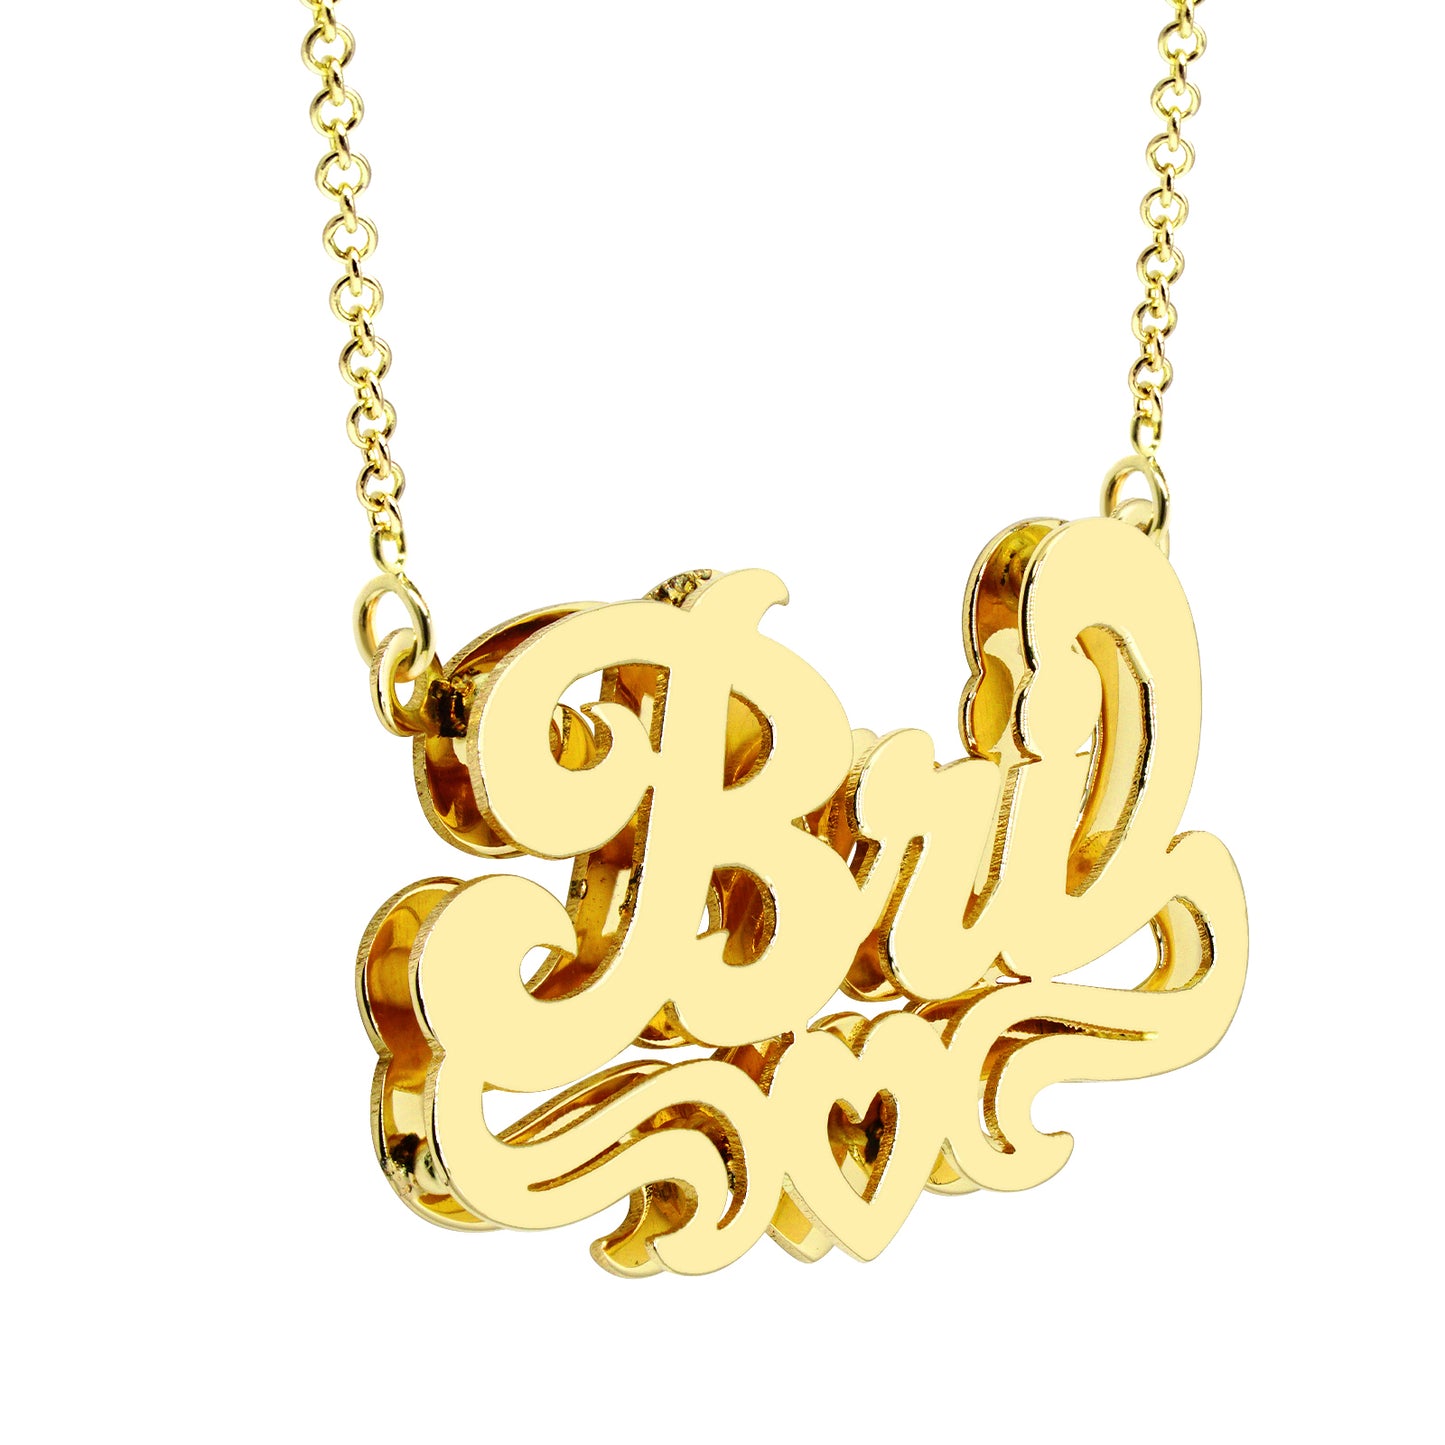 Double Layer Nameplate Necklace with Heart and Tail Flourish in High Polished 14K Gold